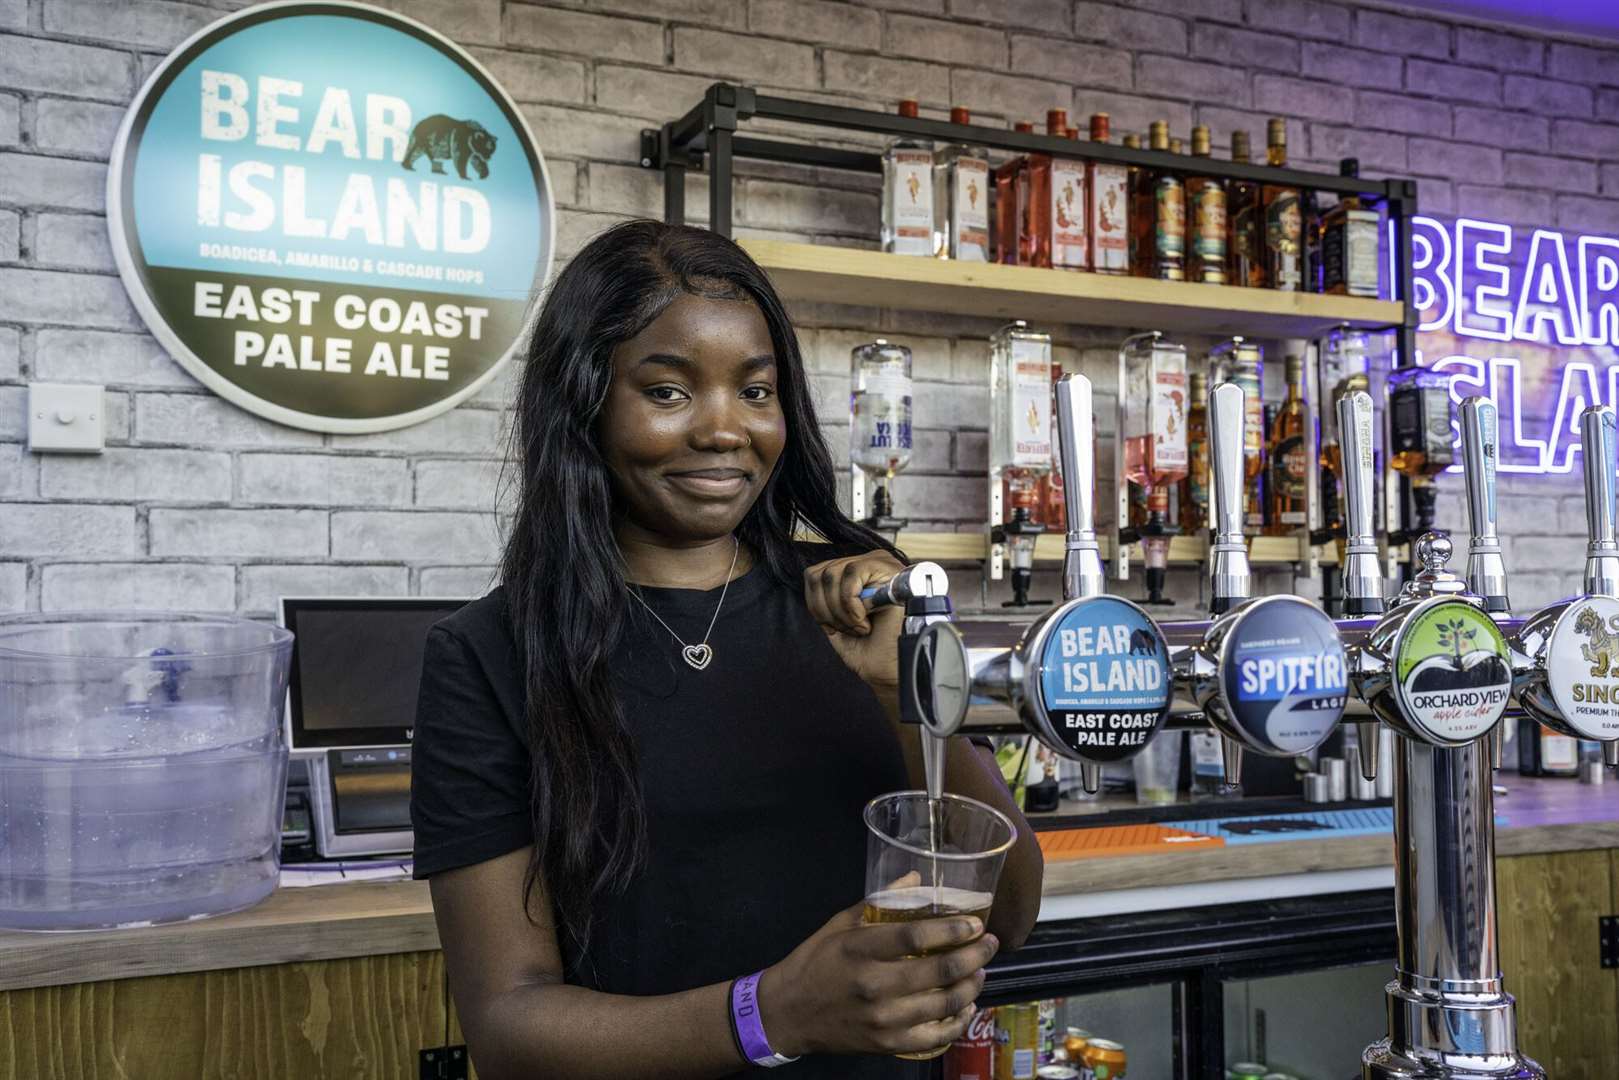 Shepherd Neame will be serving up a range of its popular brands including Spitfire, Bear Island, Singha, E1 Brew Co and Orchard View cider